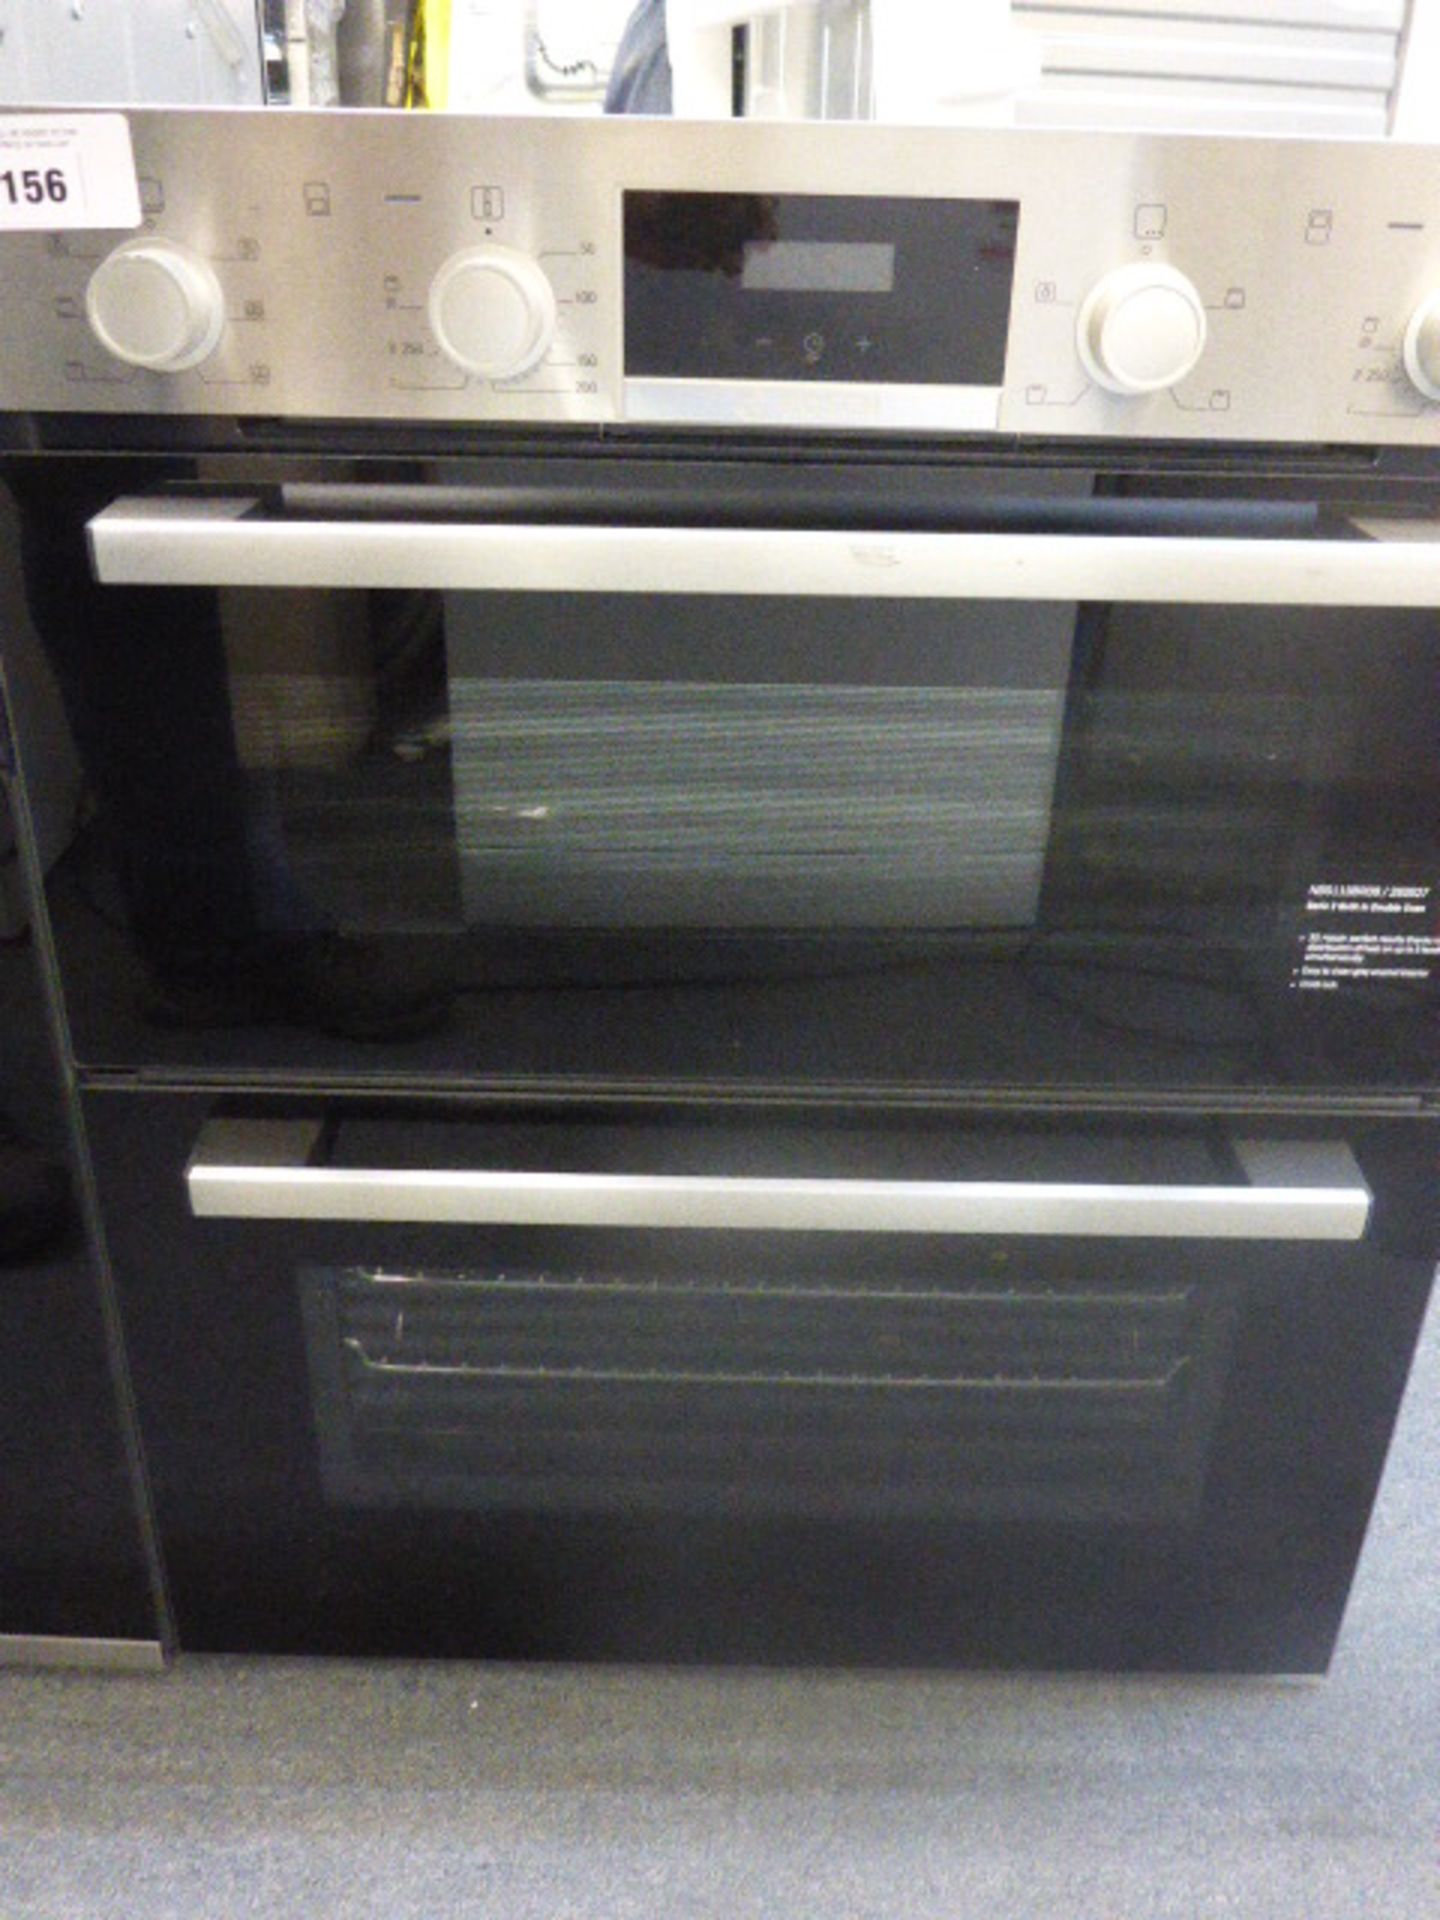 NBS113BR0BB Bosch Double compact oven